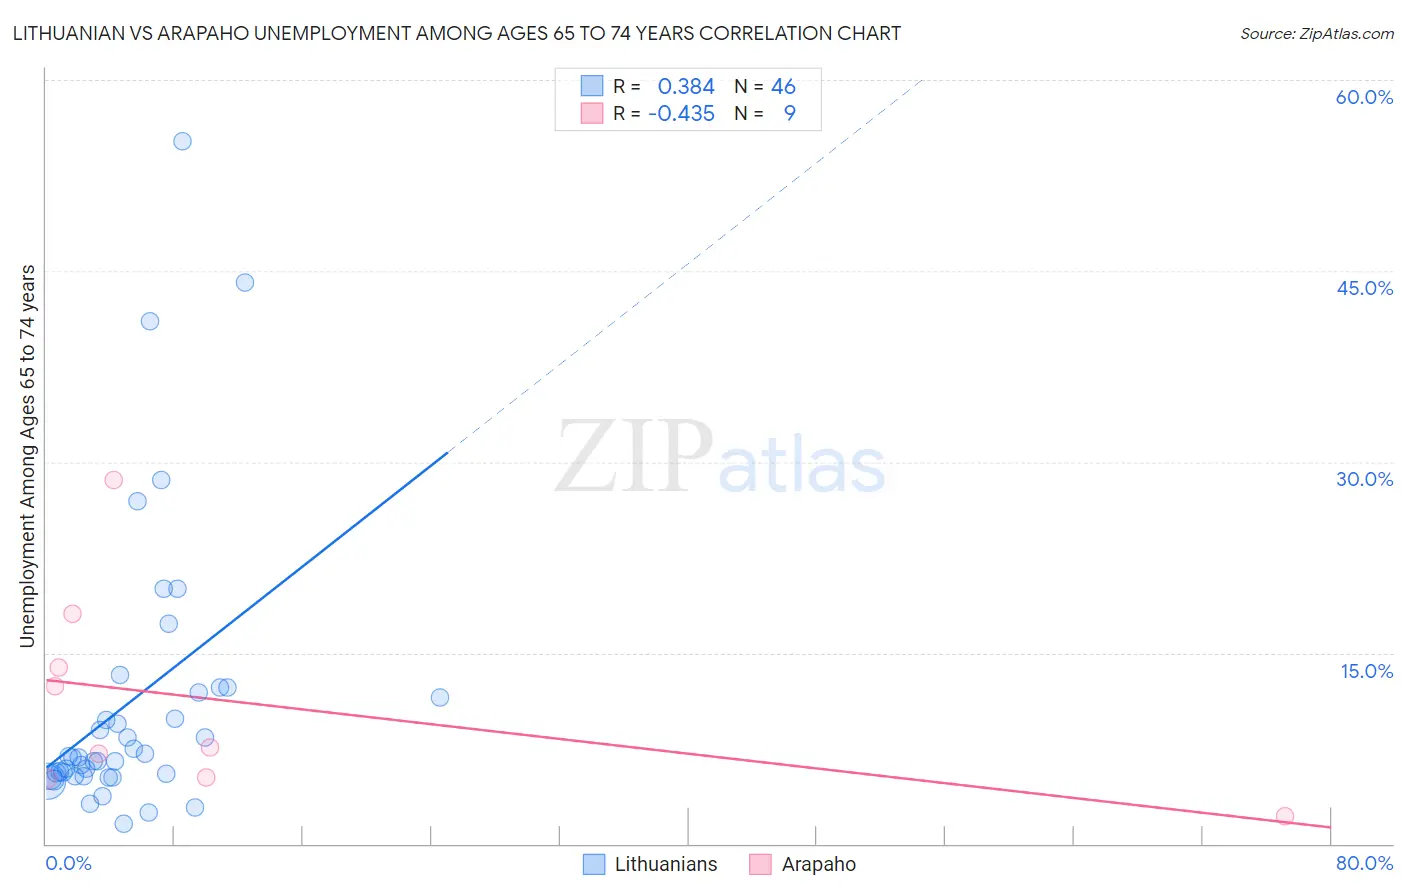 Lithuanian vs Arapaho Unemployment Among Ages 65 to 74 years